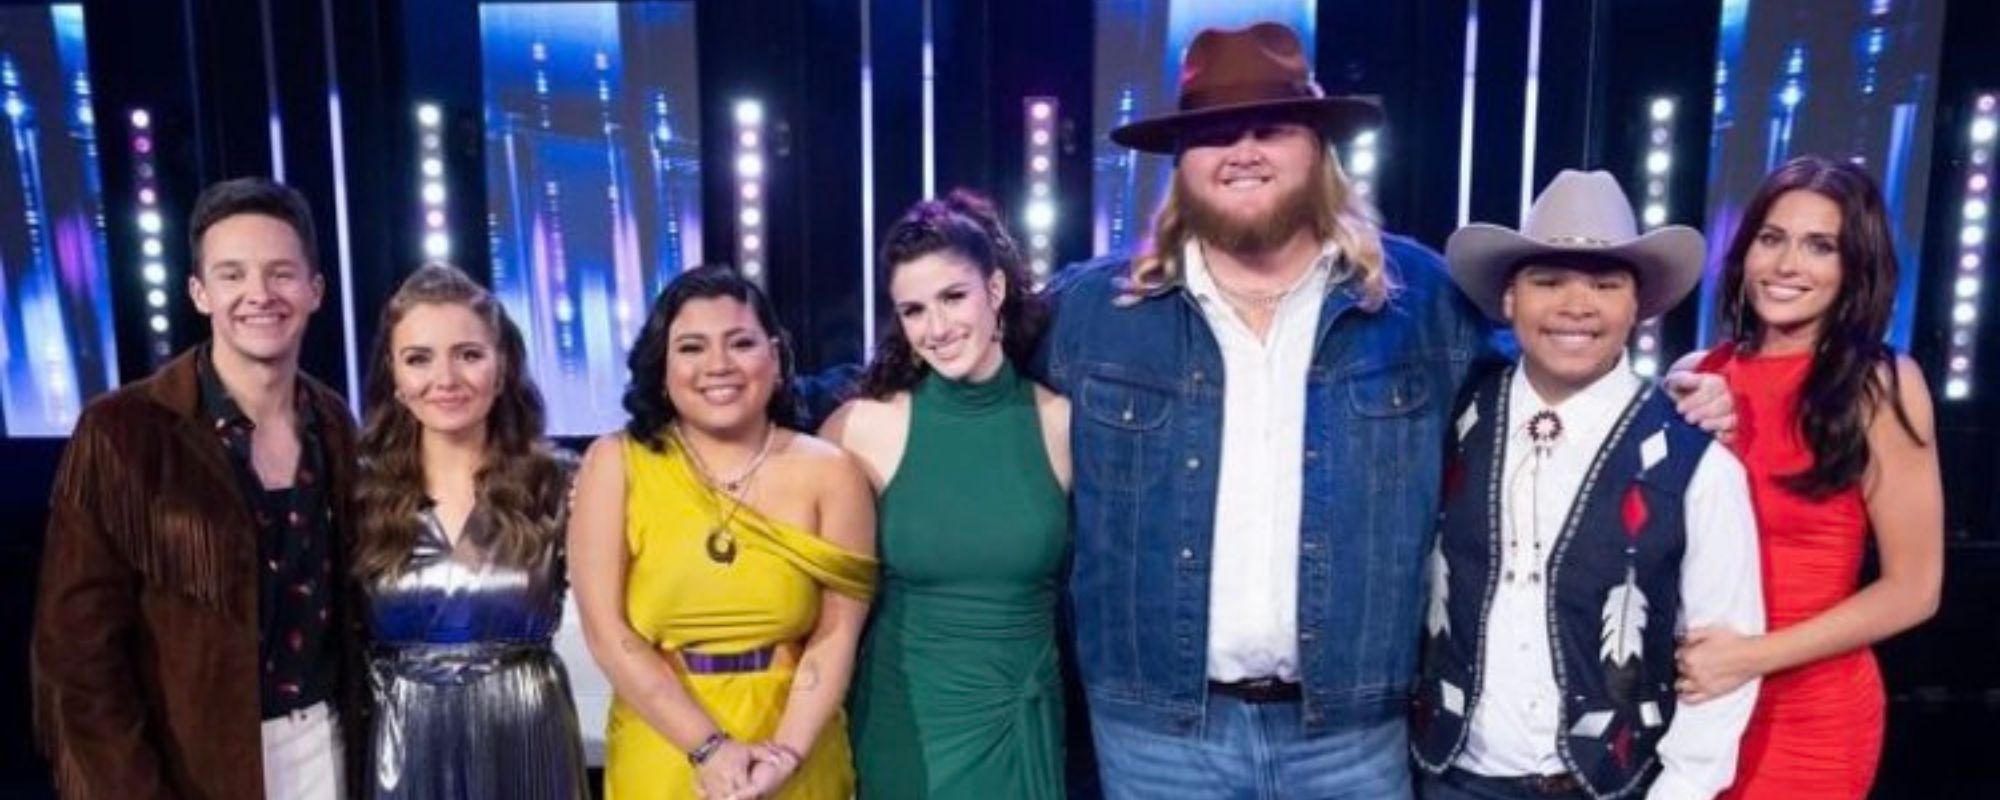 Did Loretta Lynn’s Granddaughter Emmy Russell Make the Top 5? 'American Idol' Results, Reactions